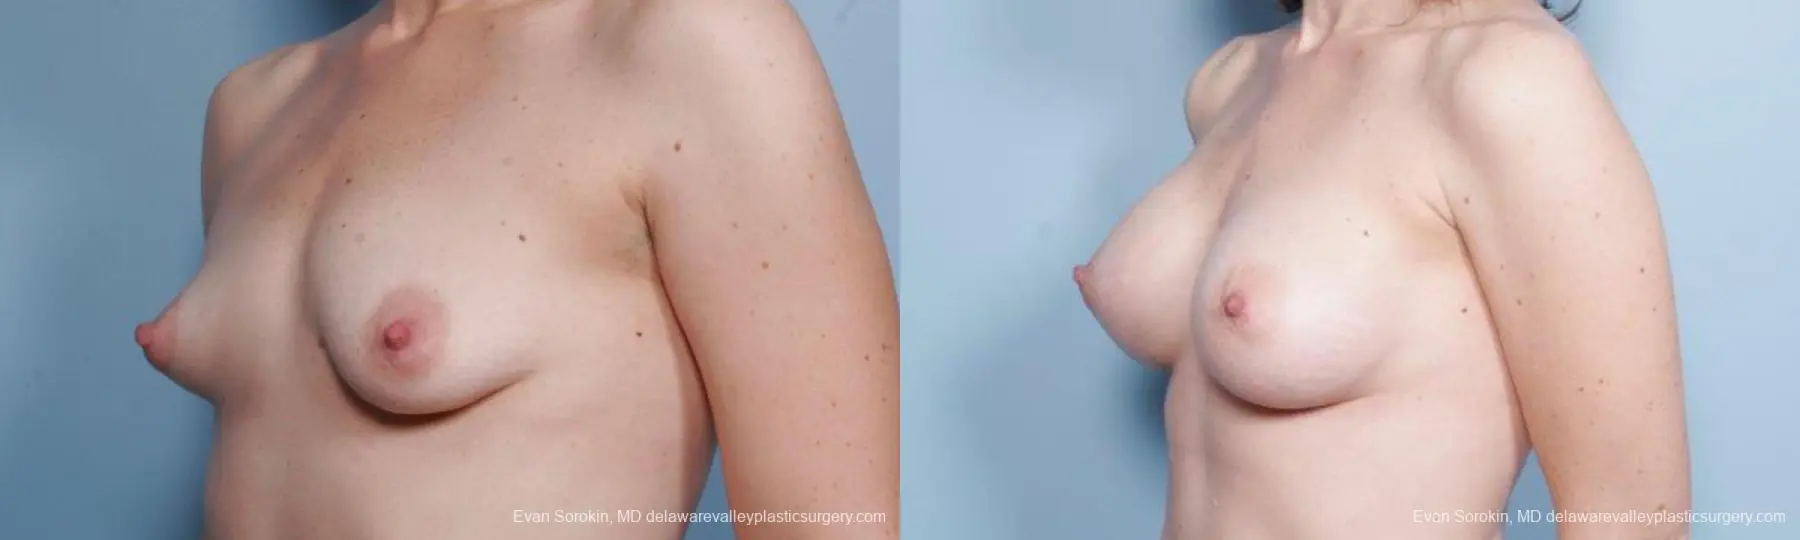 Philadelphia Breast Augmentation 9302 - Before and After 4